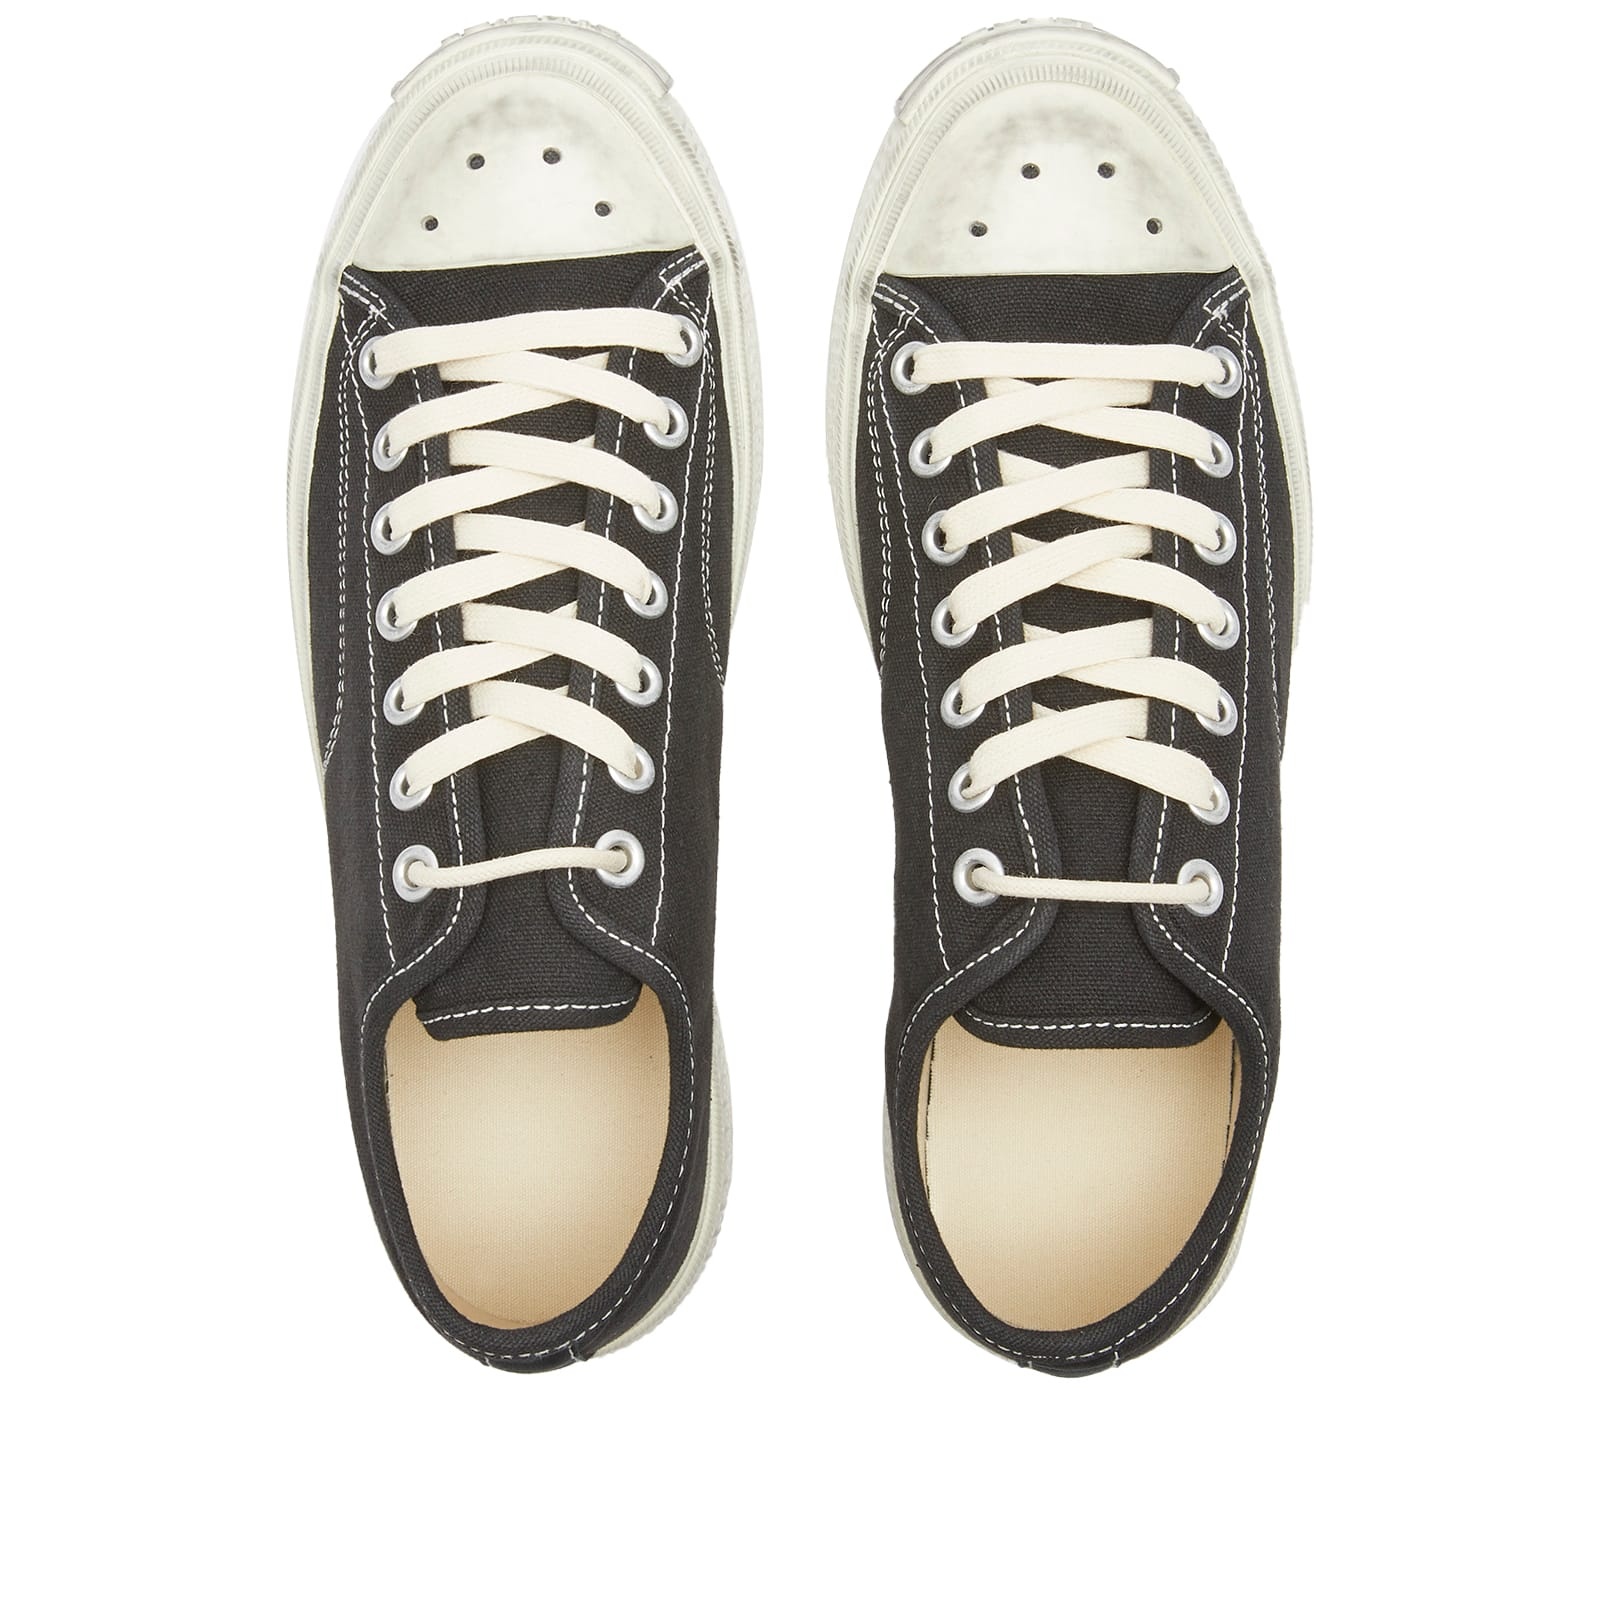 Acne Studios Ballow Soft Tumbled Tag Sneakers - 5